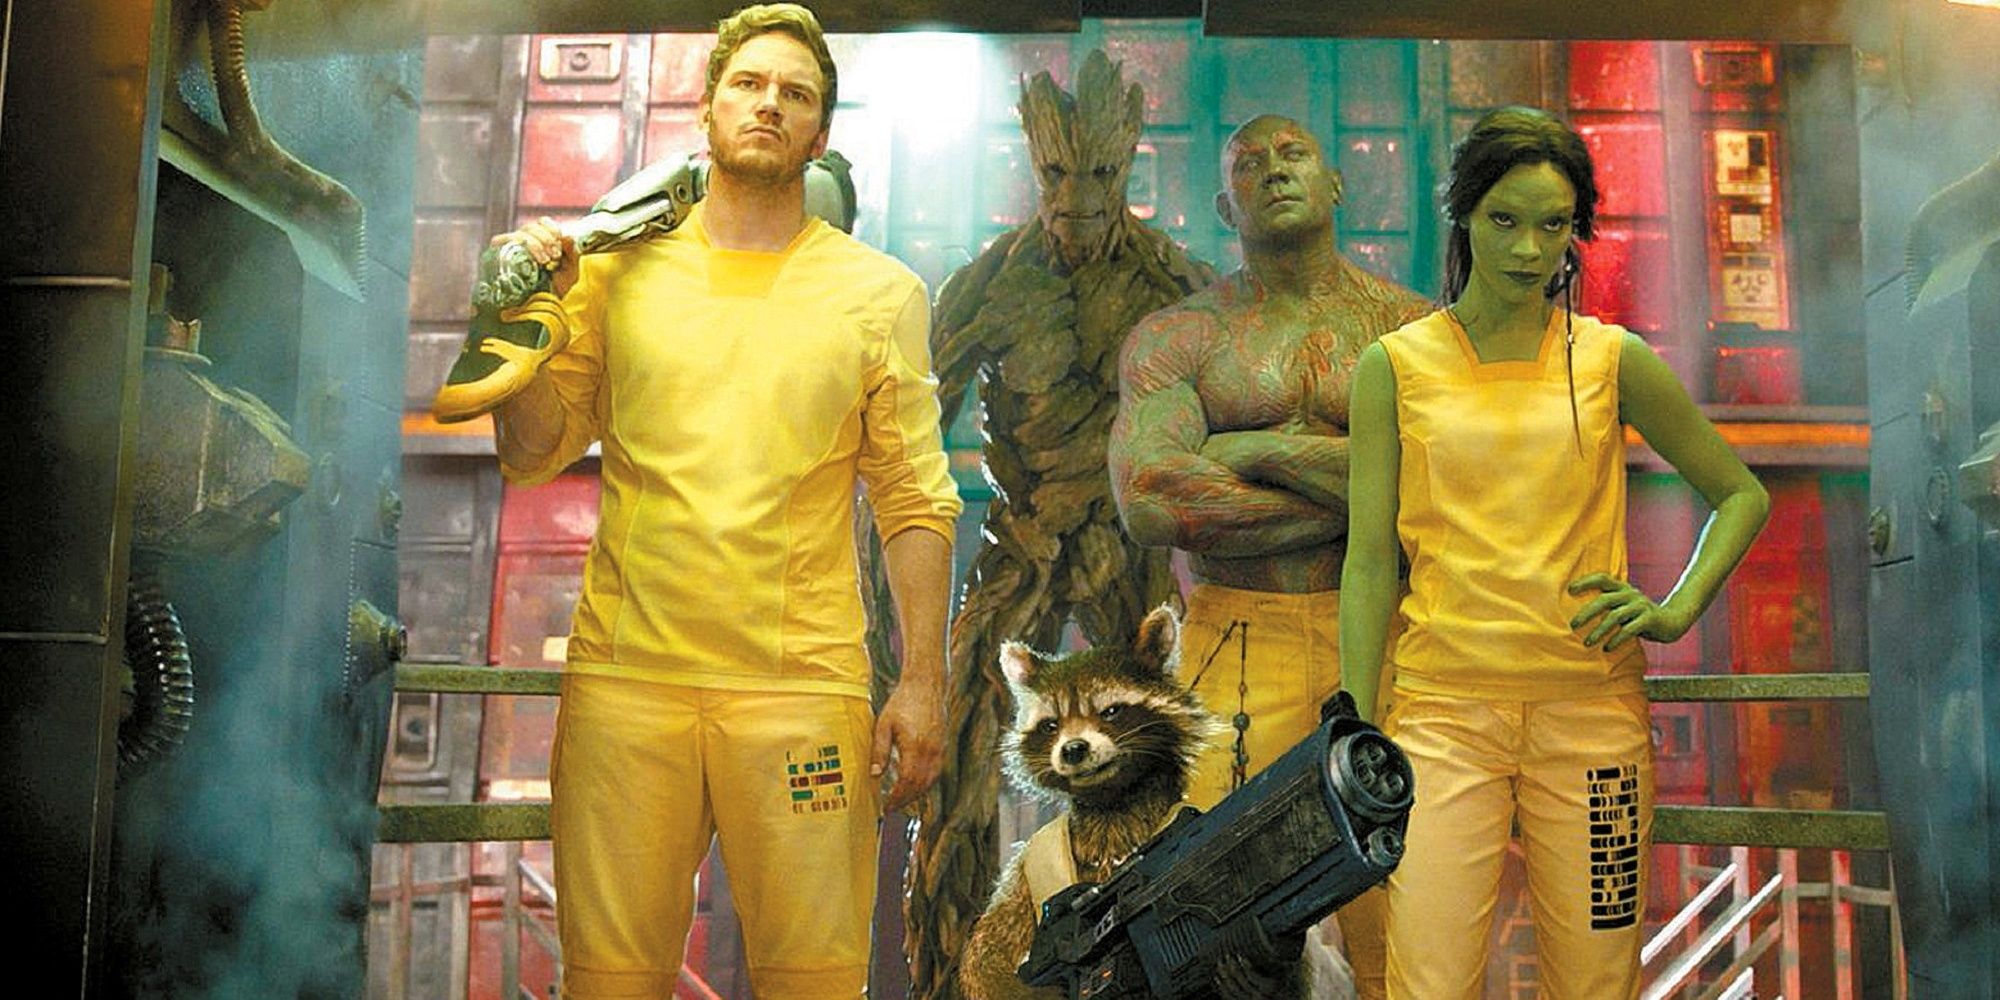 Guardians of the Galaxy Vol 1 with Star-Lord and group in jail.